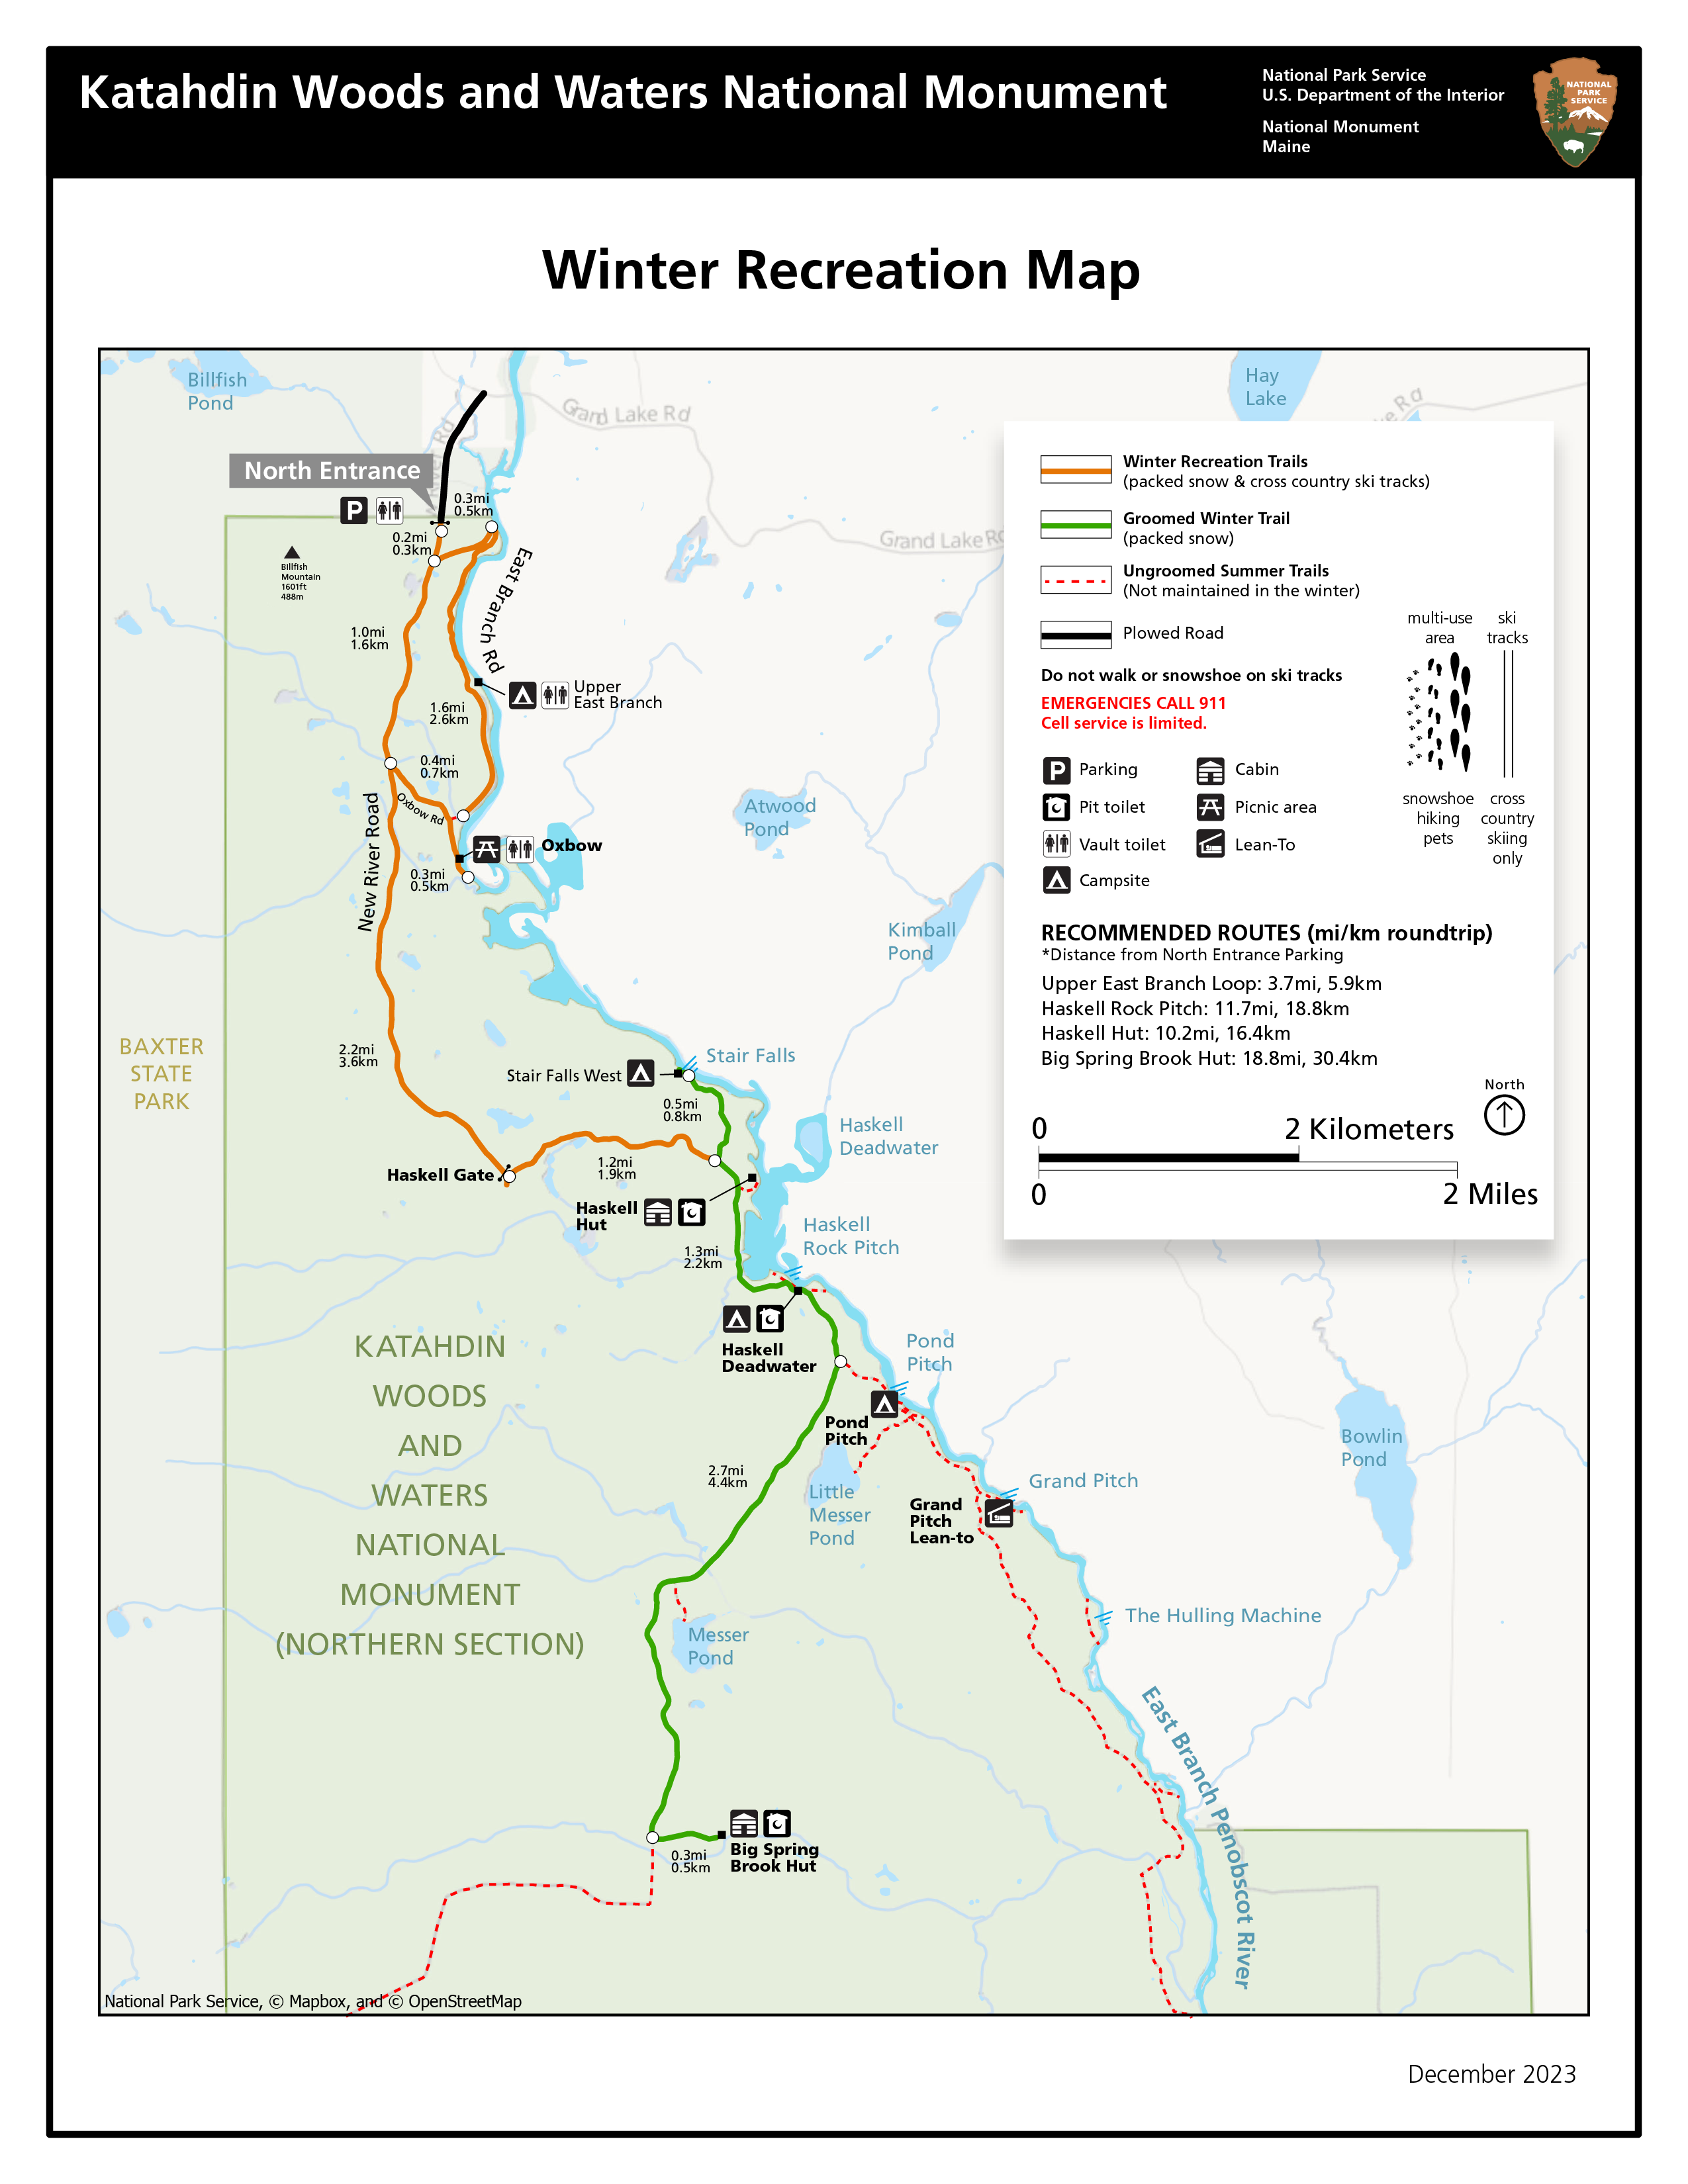 winter recreation map that shows areas of recreation, groomed, and unmaintained trails during the winter.